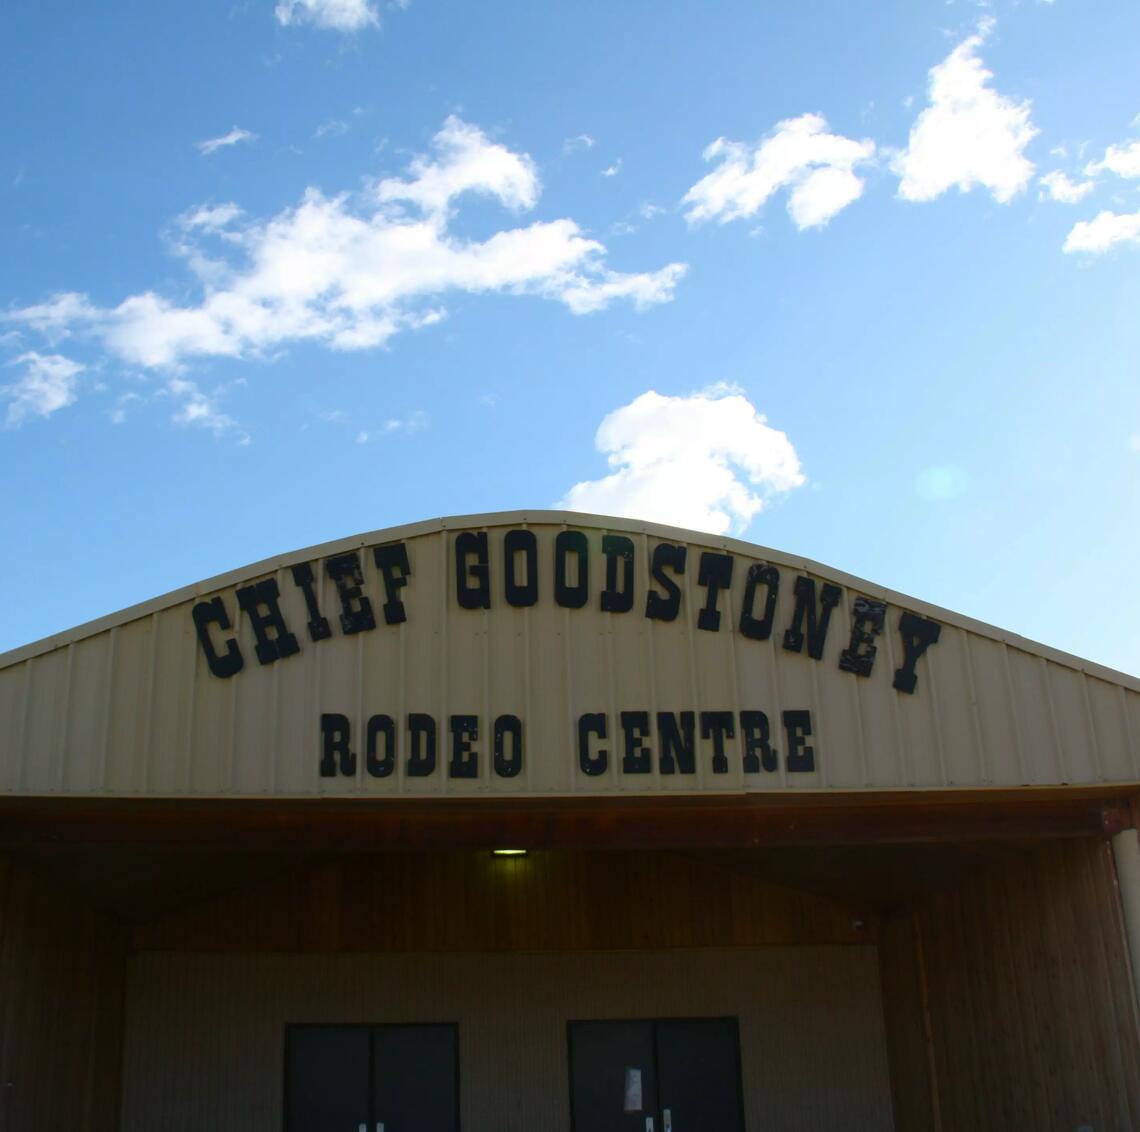 Chief Goodstoney Rodeo Centre, where the clinics take place.